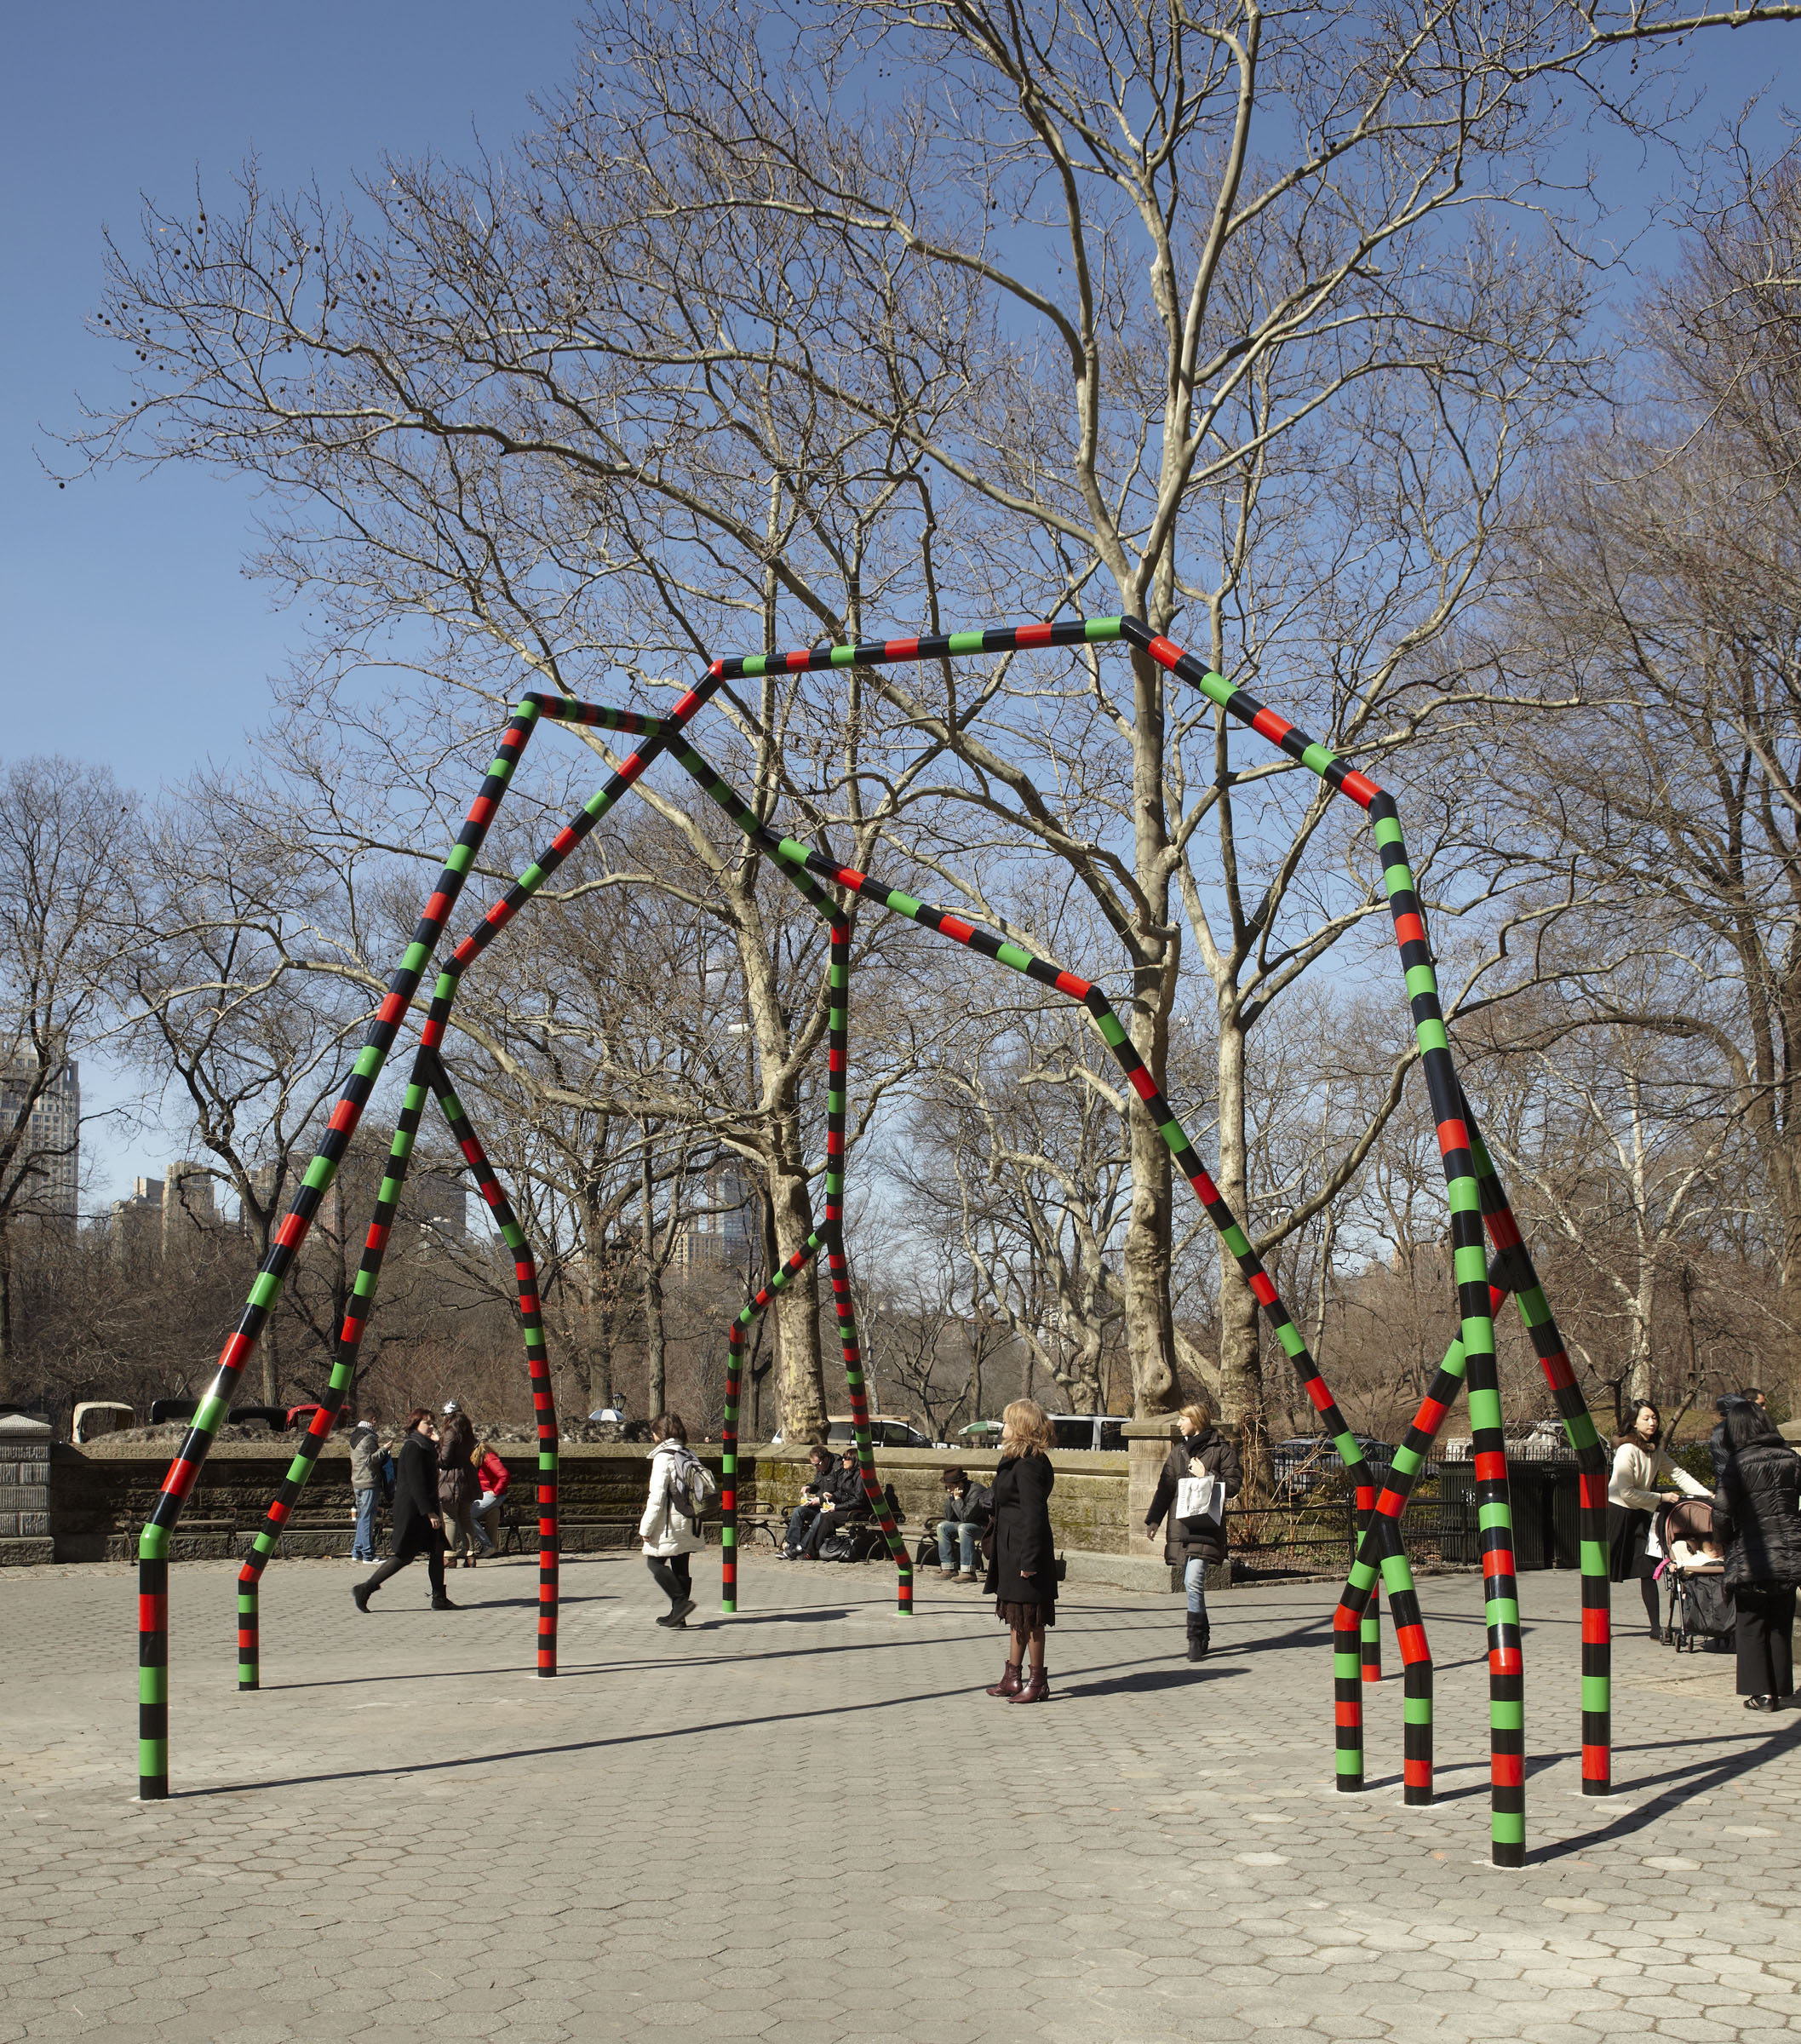 London-based Eva Rothschild will be part of the Nasher’s Sightings series